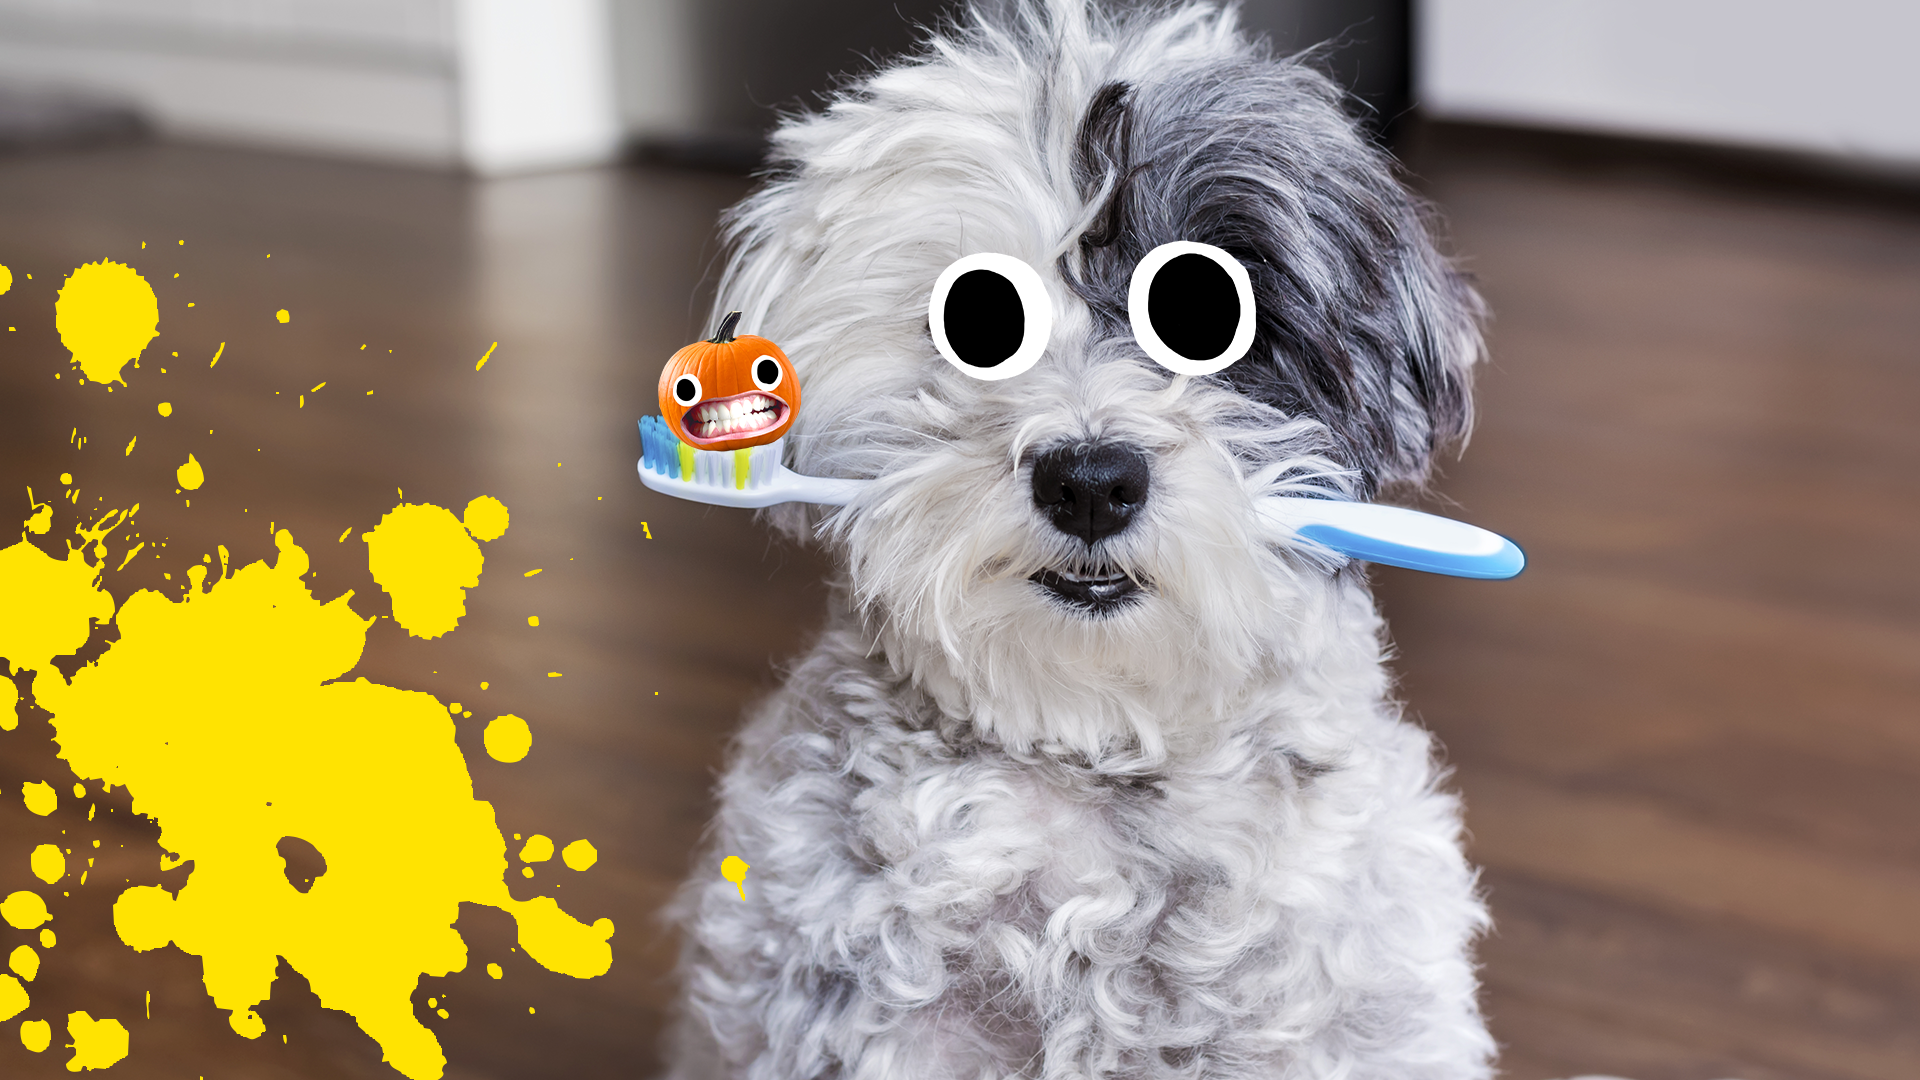 Dog with toothbrush with goody pumpkin and yellow splat